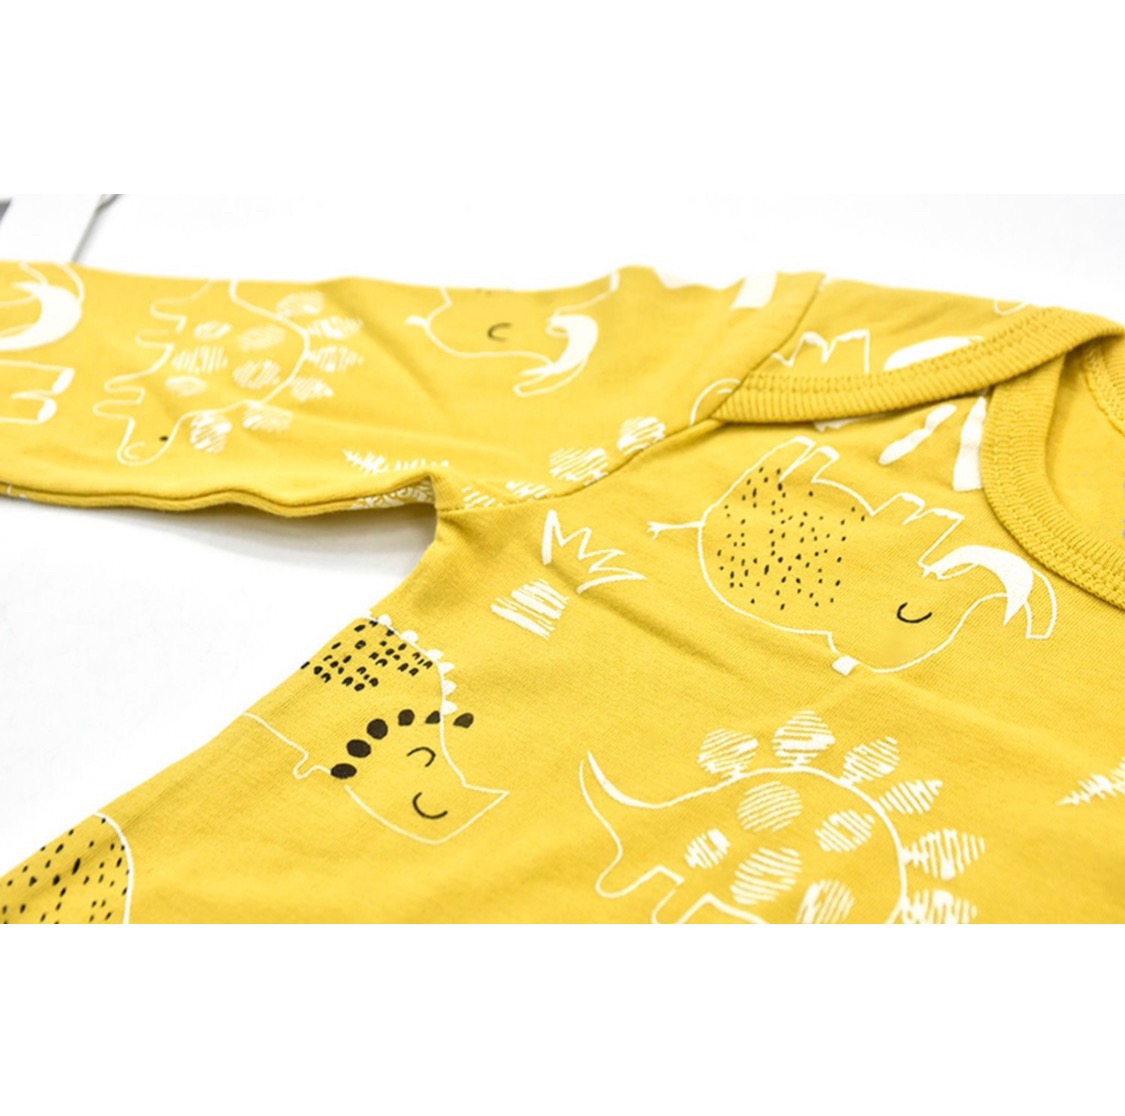 BODY WITH DINOSAUR PRINT - MUSTANG / YELLOW - LONG SLEEVED